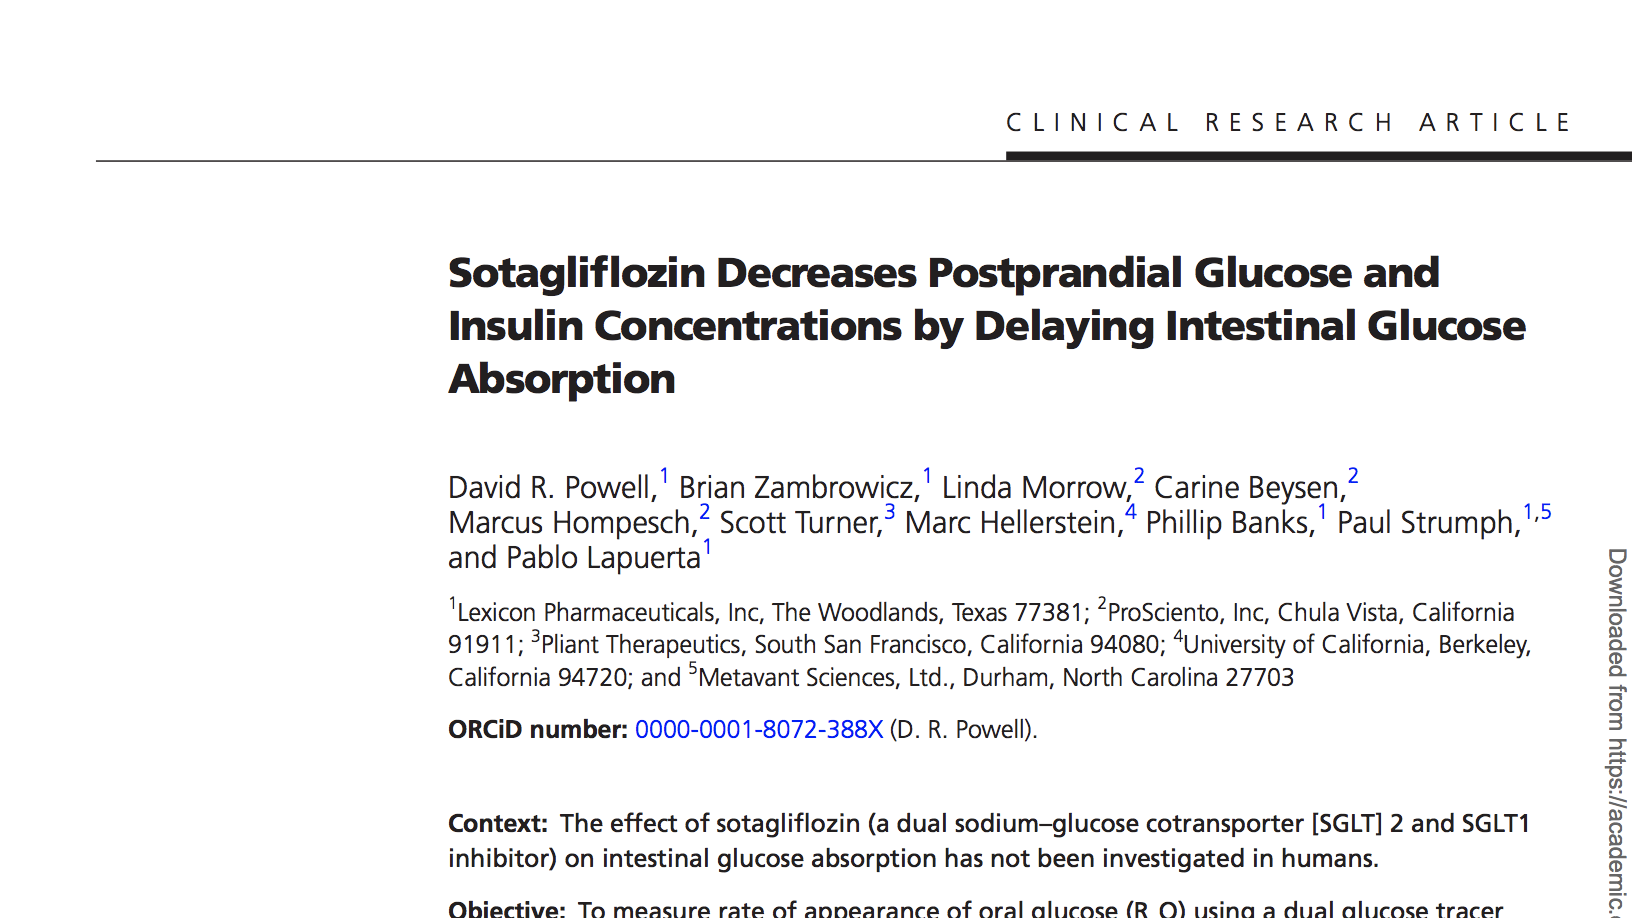 image of Sotagliflozin Decreases Postprandial Glucose and Insulin Concentrations by Delaying Intestinal Glucose Absorption